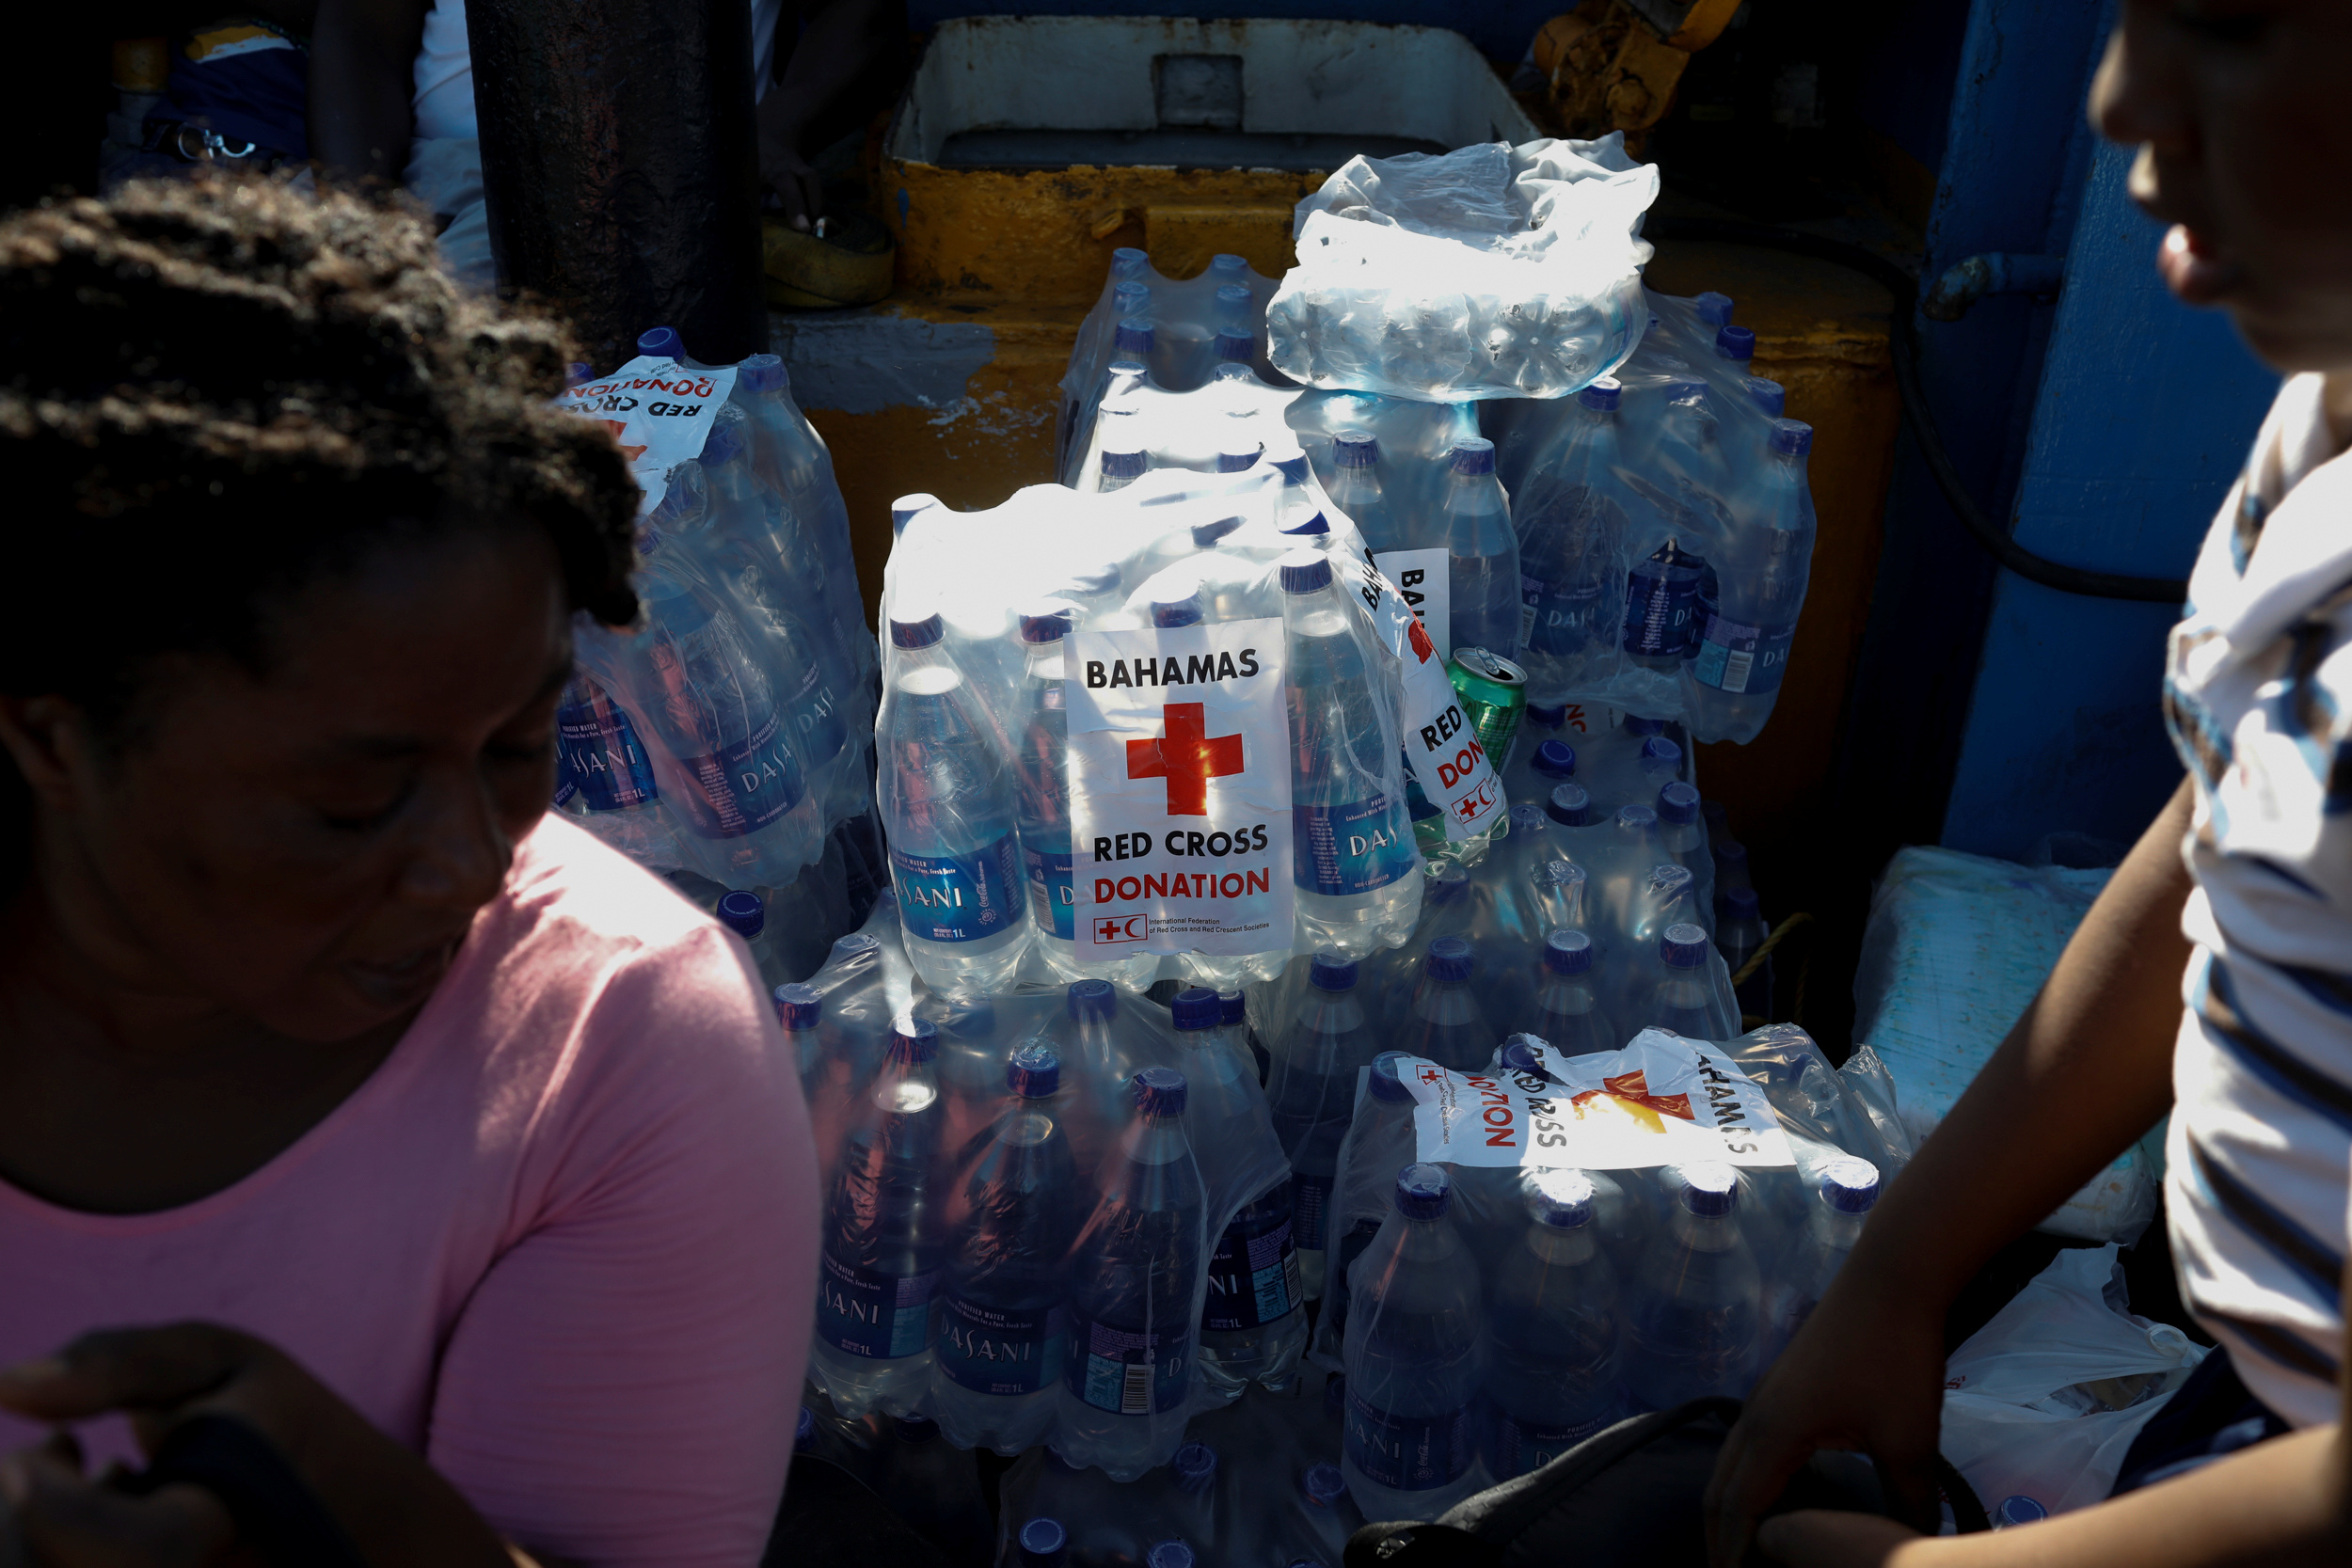 Bottles of water with the logo of Red Cross are seen in a ferry at Marsh Harbour Government Port during an evacuation operation after Hurricane Dorian hit the Abaco Islands in Marsh Harbour, Bahamas, September 6, 2019. REUTERS/Marco Bello